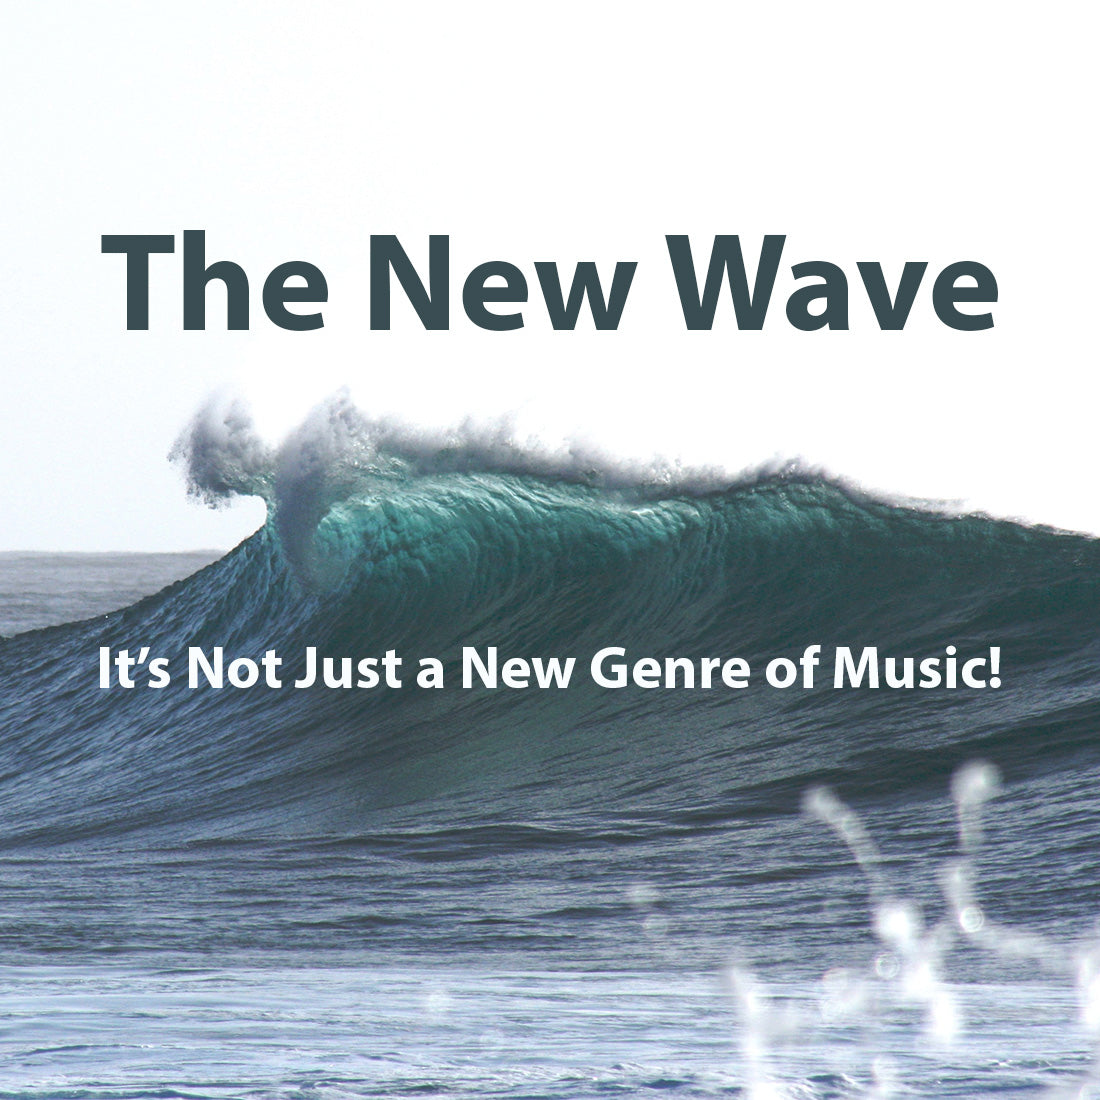 The New Wave. It's not just a genre of music! – American Mortuary ...